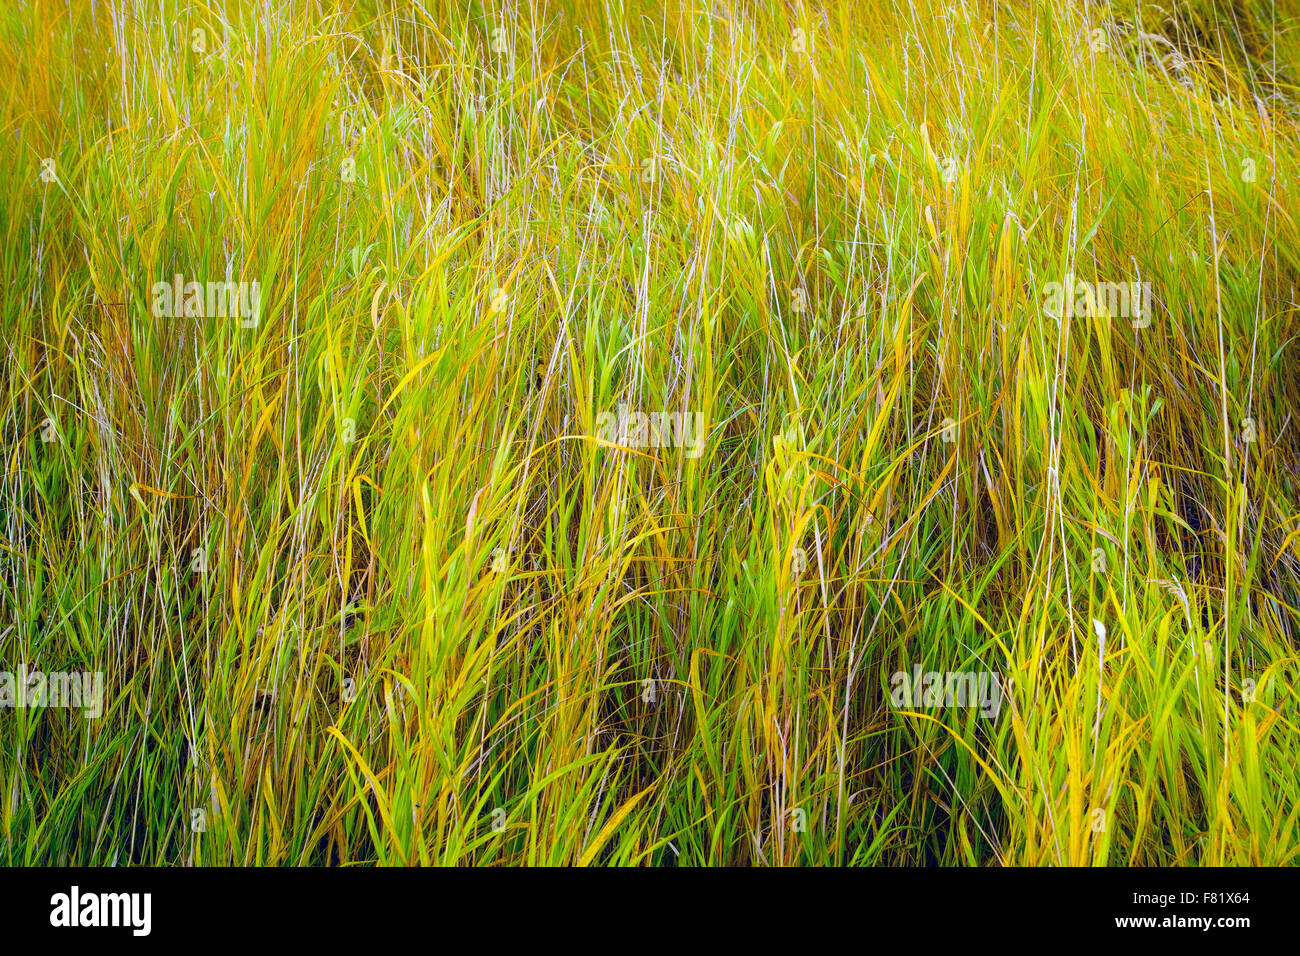 Grass, Beauty In Nature. Sweden. Stock Photo